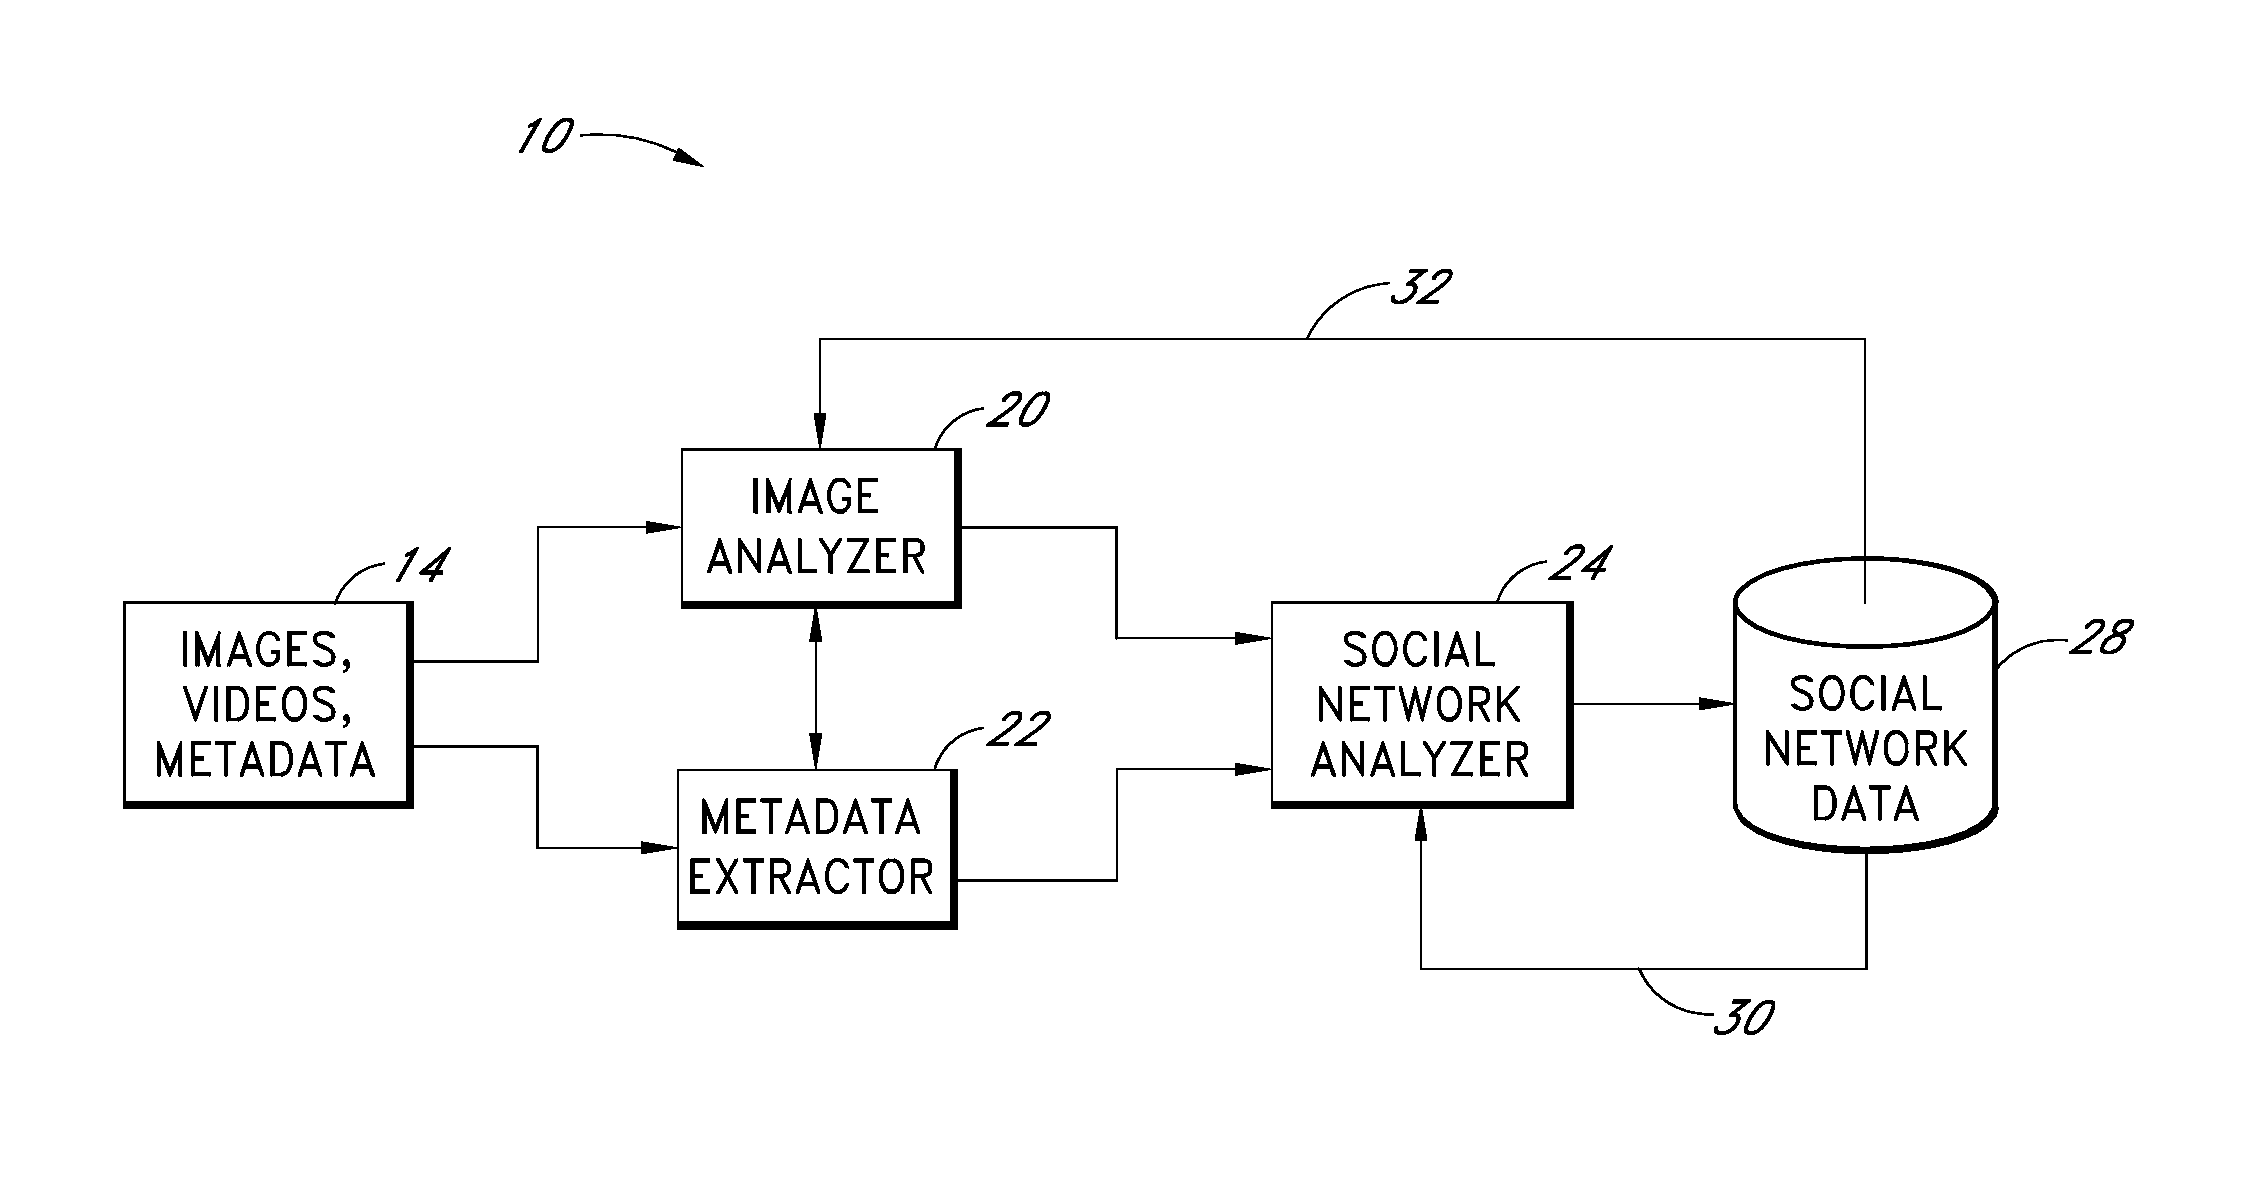 Systems and methods for building and using social networks in image analysis